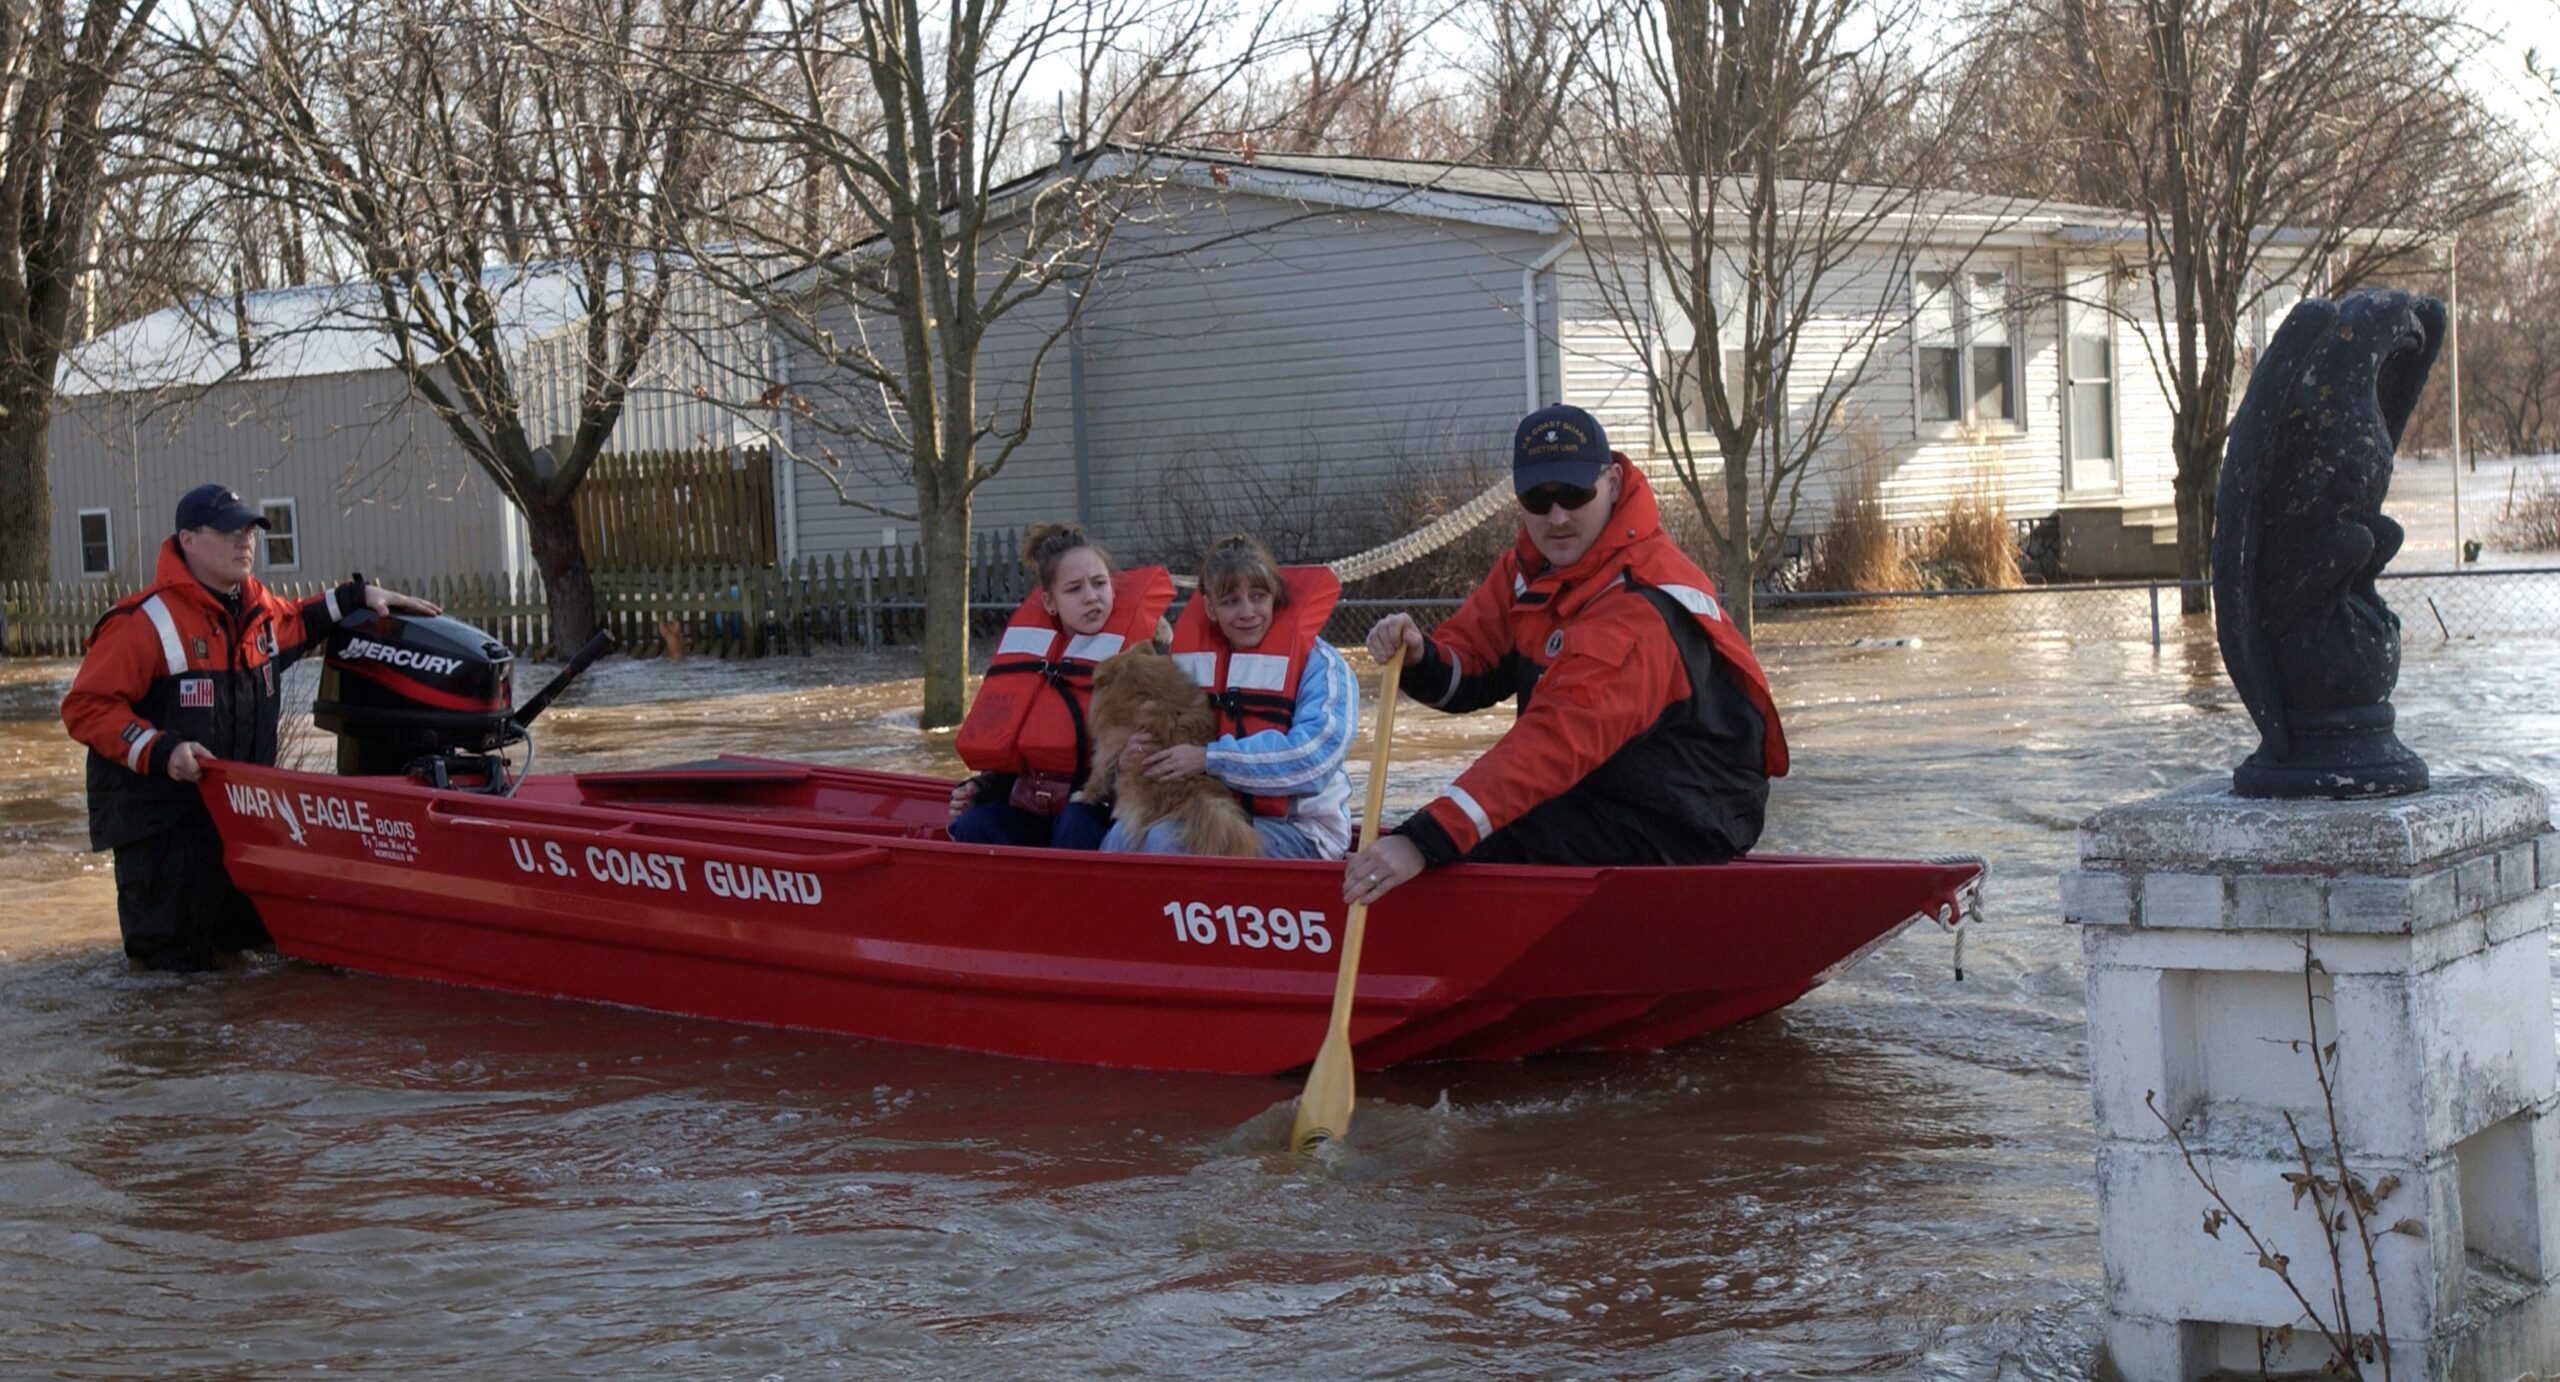 Photo of red U.S. Coast Guard boat in flood water, one paddling, one standing at engine in flood water, with two young girls and dog in boat in residential area.